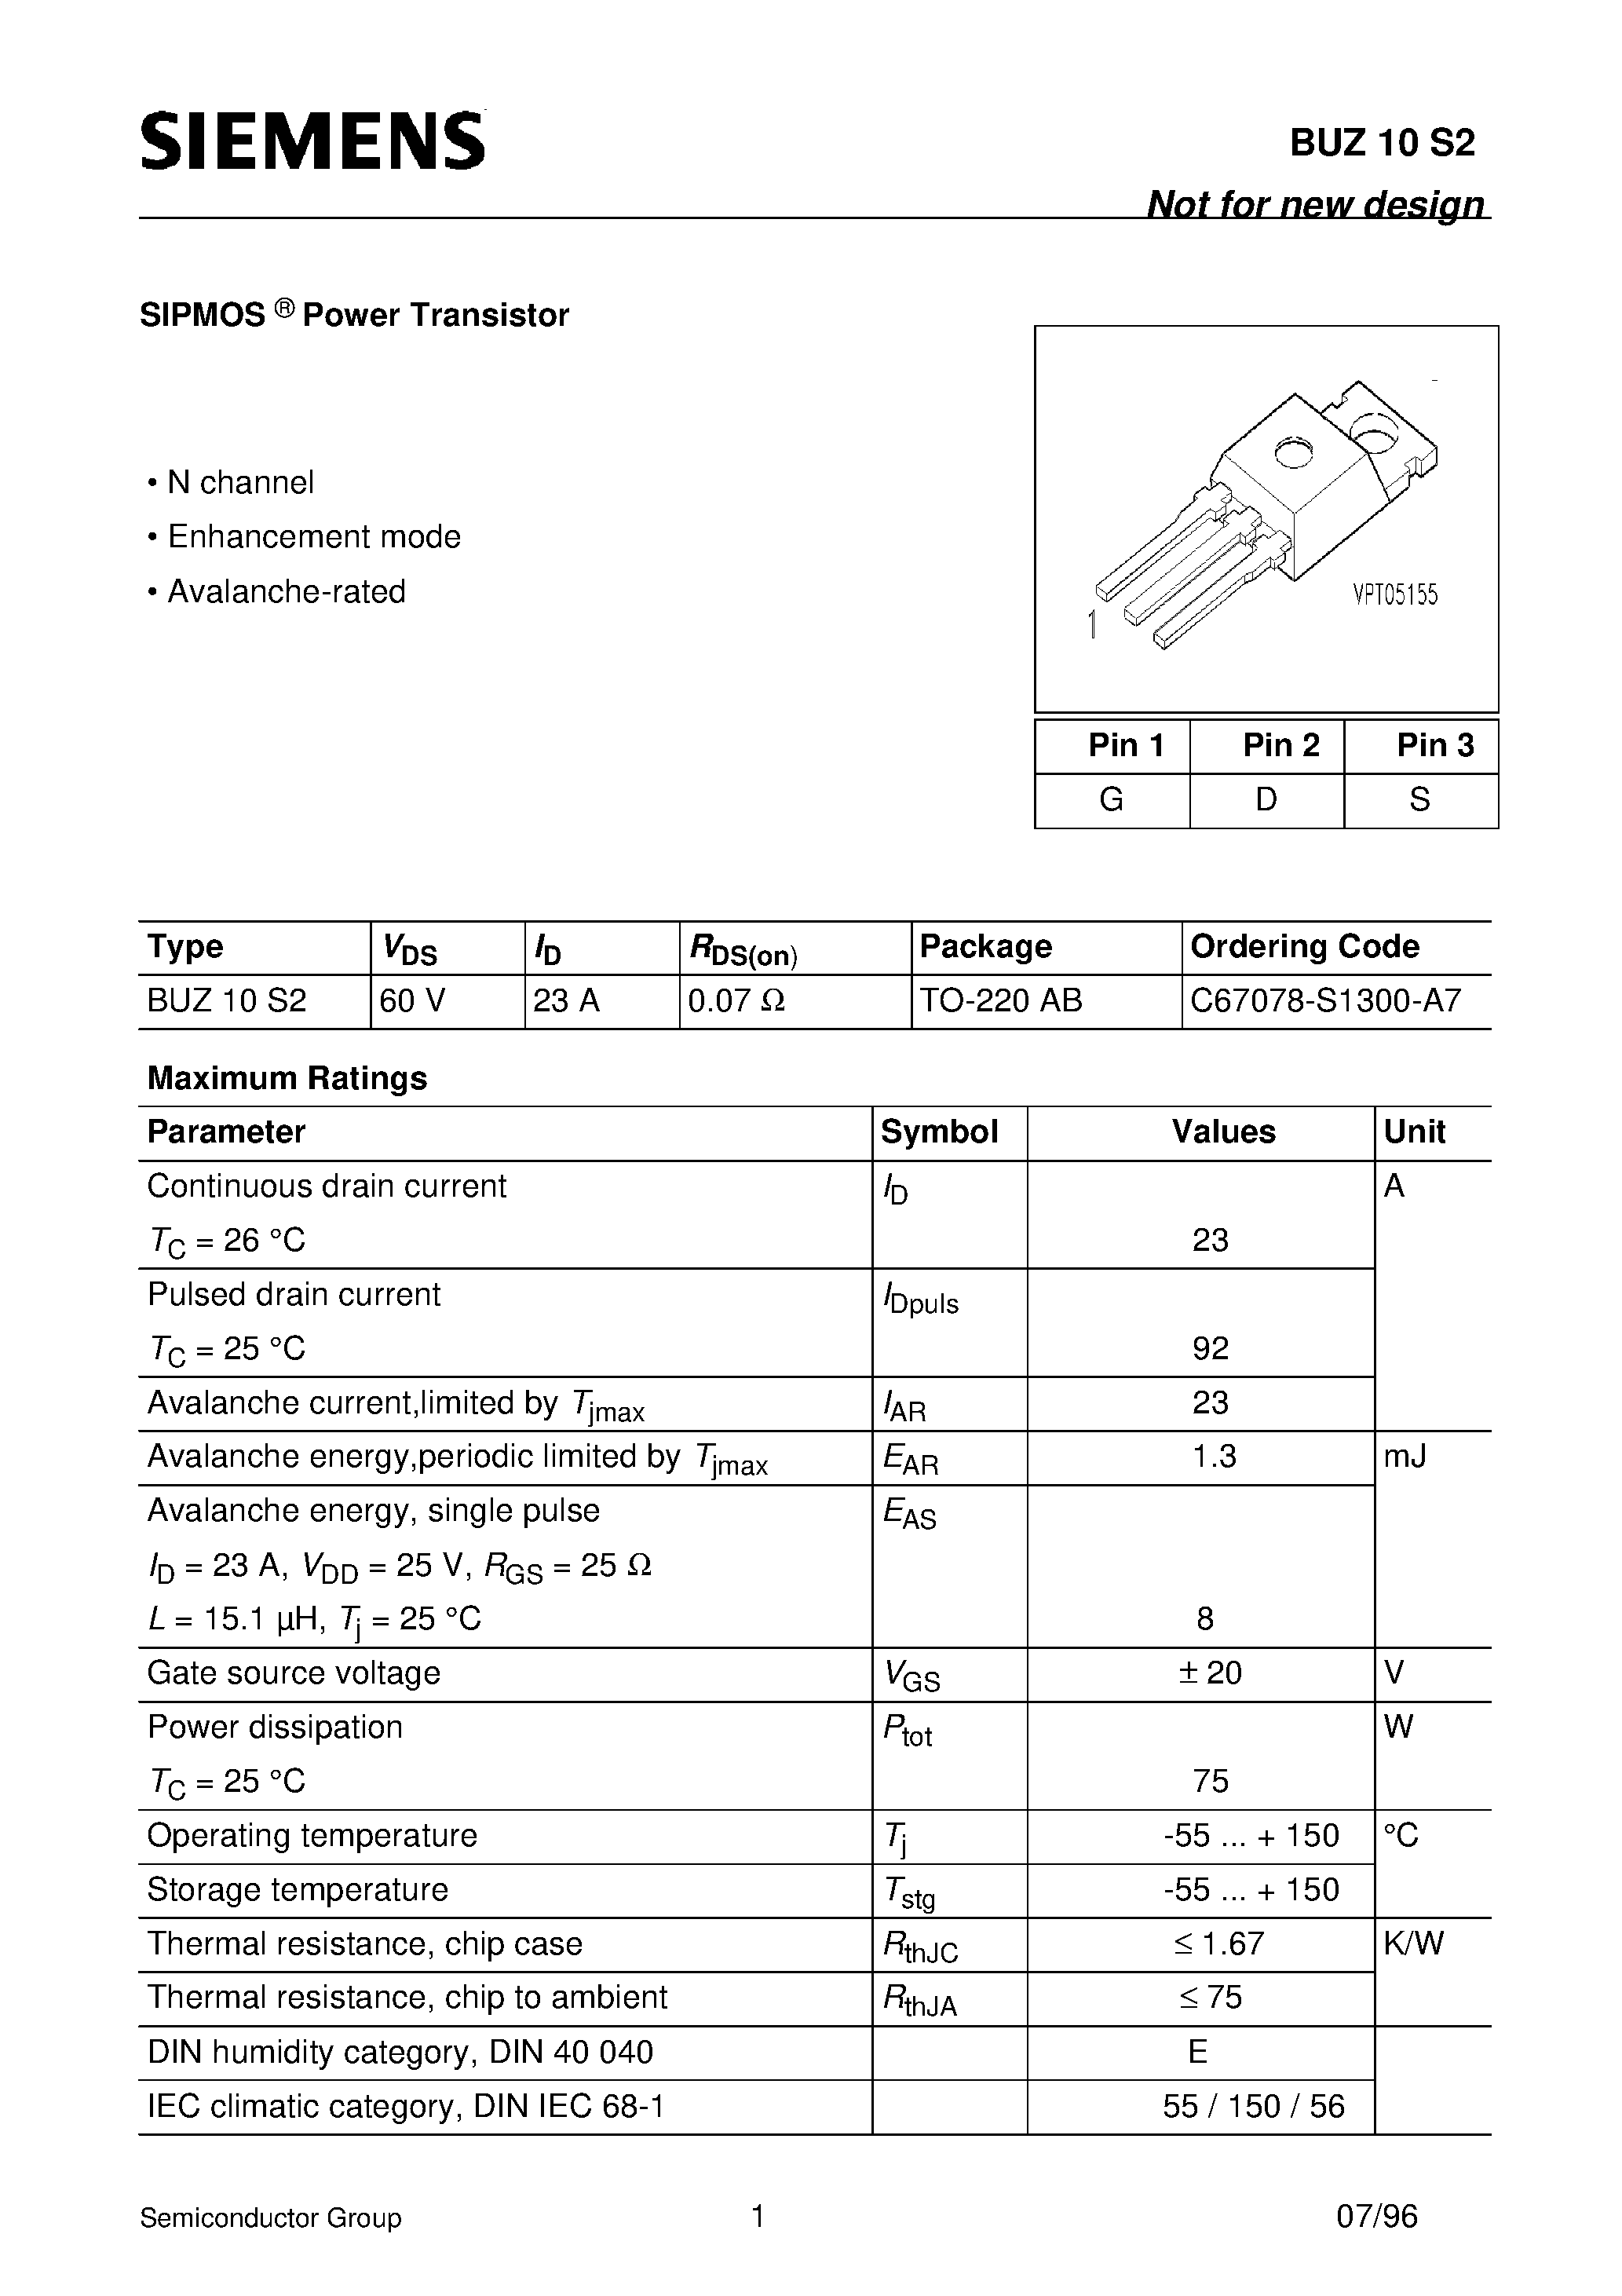 Datasheet BUZ10S2 - SIPMOS Power Transistor (N channel Enhancement mode Avalanche-rated) page 1